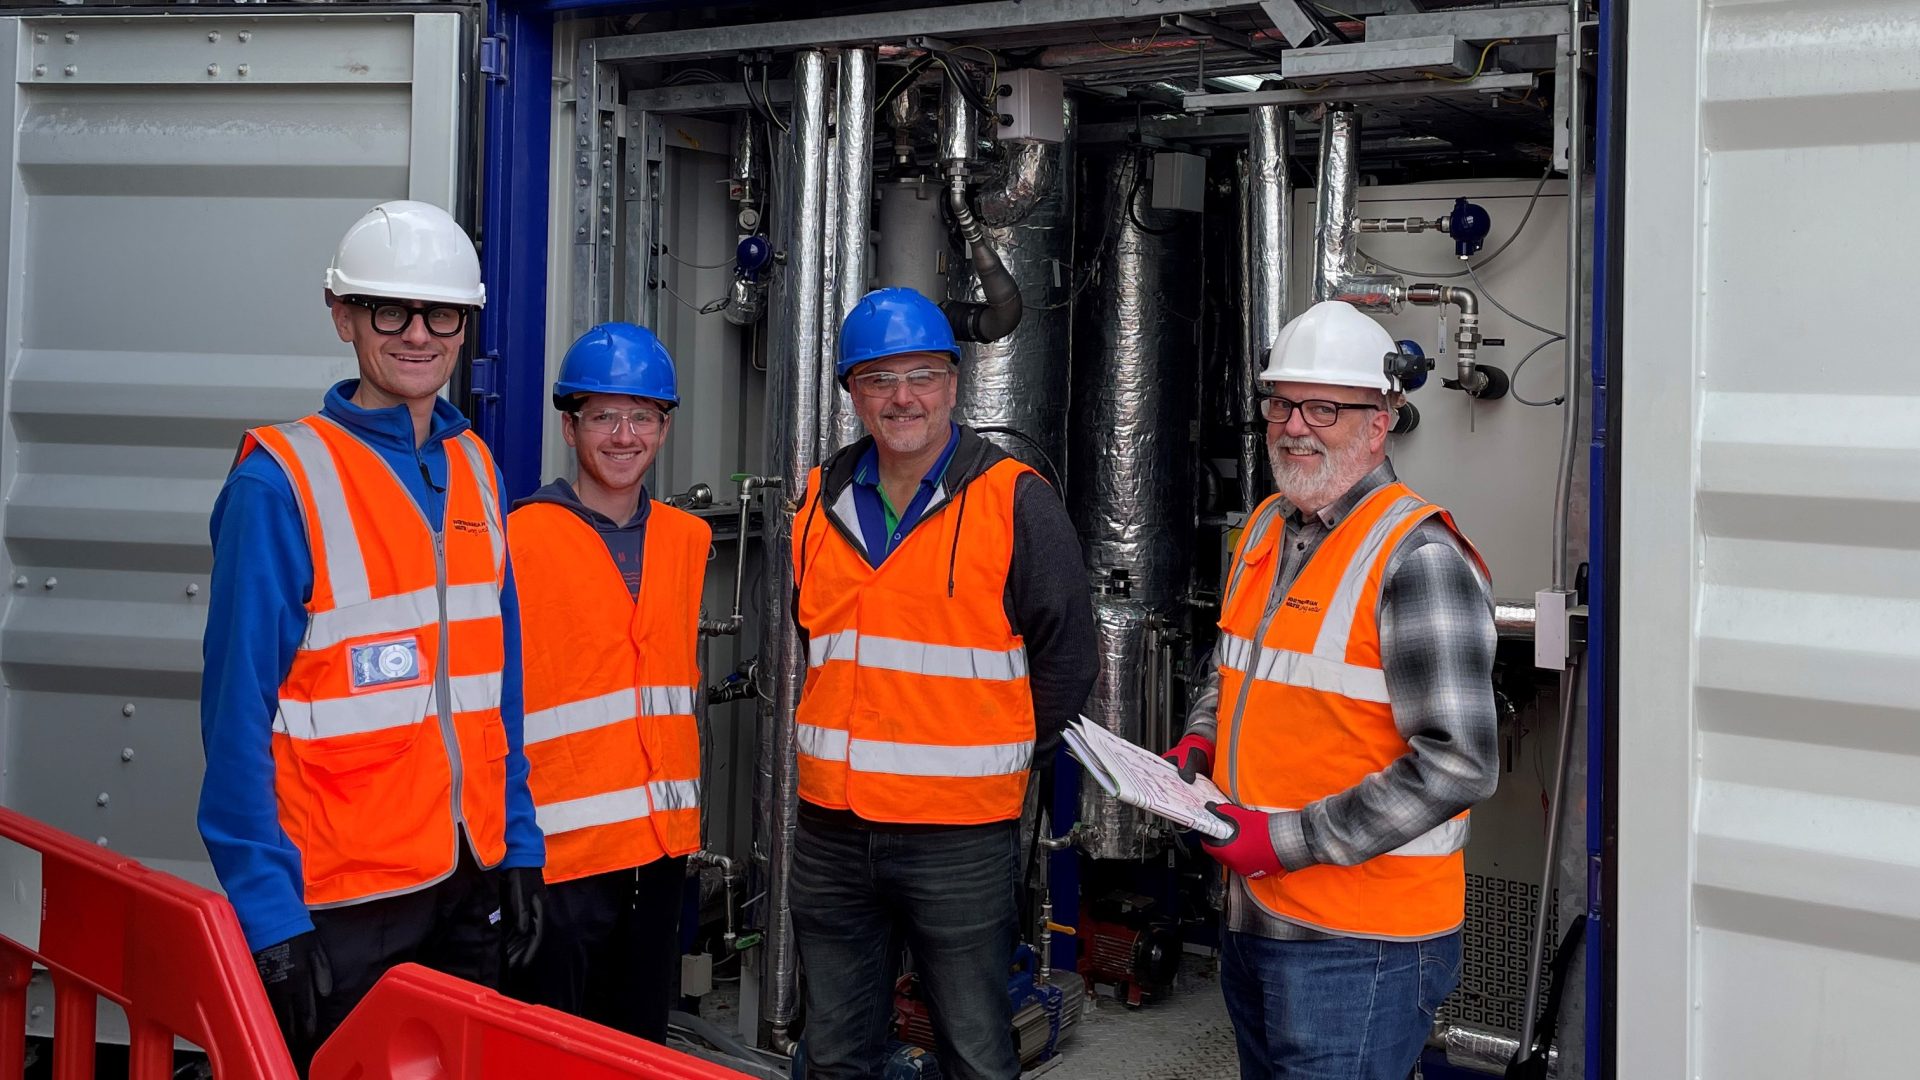 Teams from Northumbrian Water and Organics in front of the ammonia stripper.